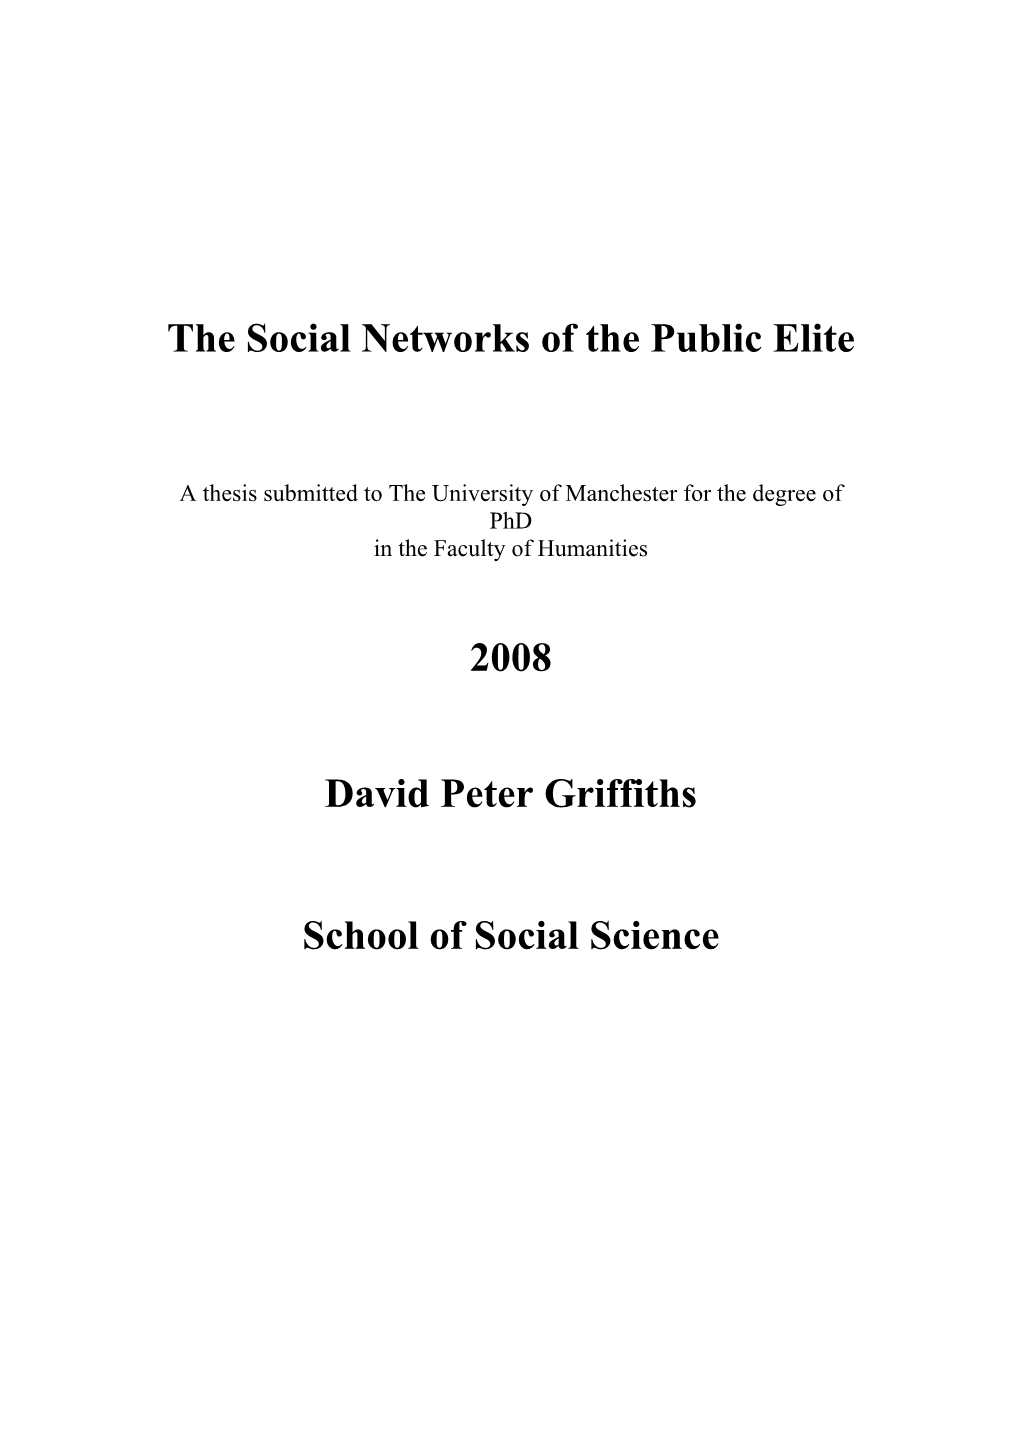 The Social Networks of the Public Elite 2008 David Peter Griffiths School of Social Science